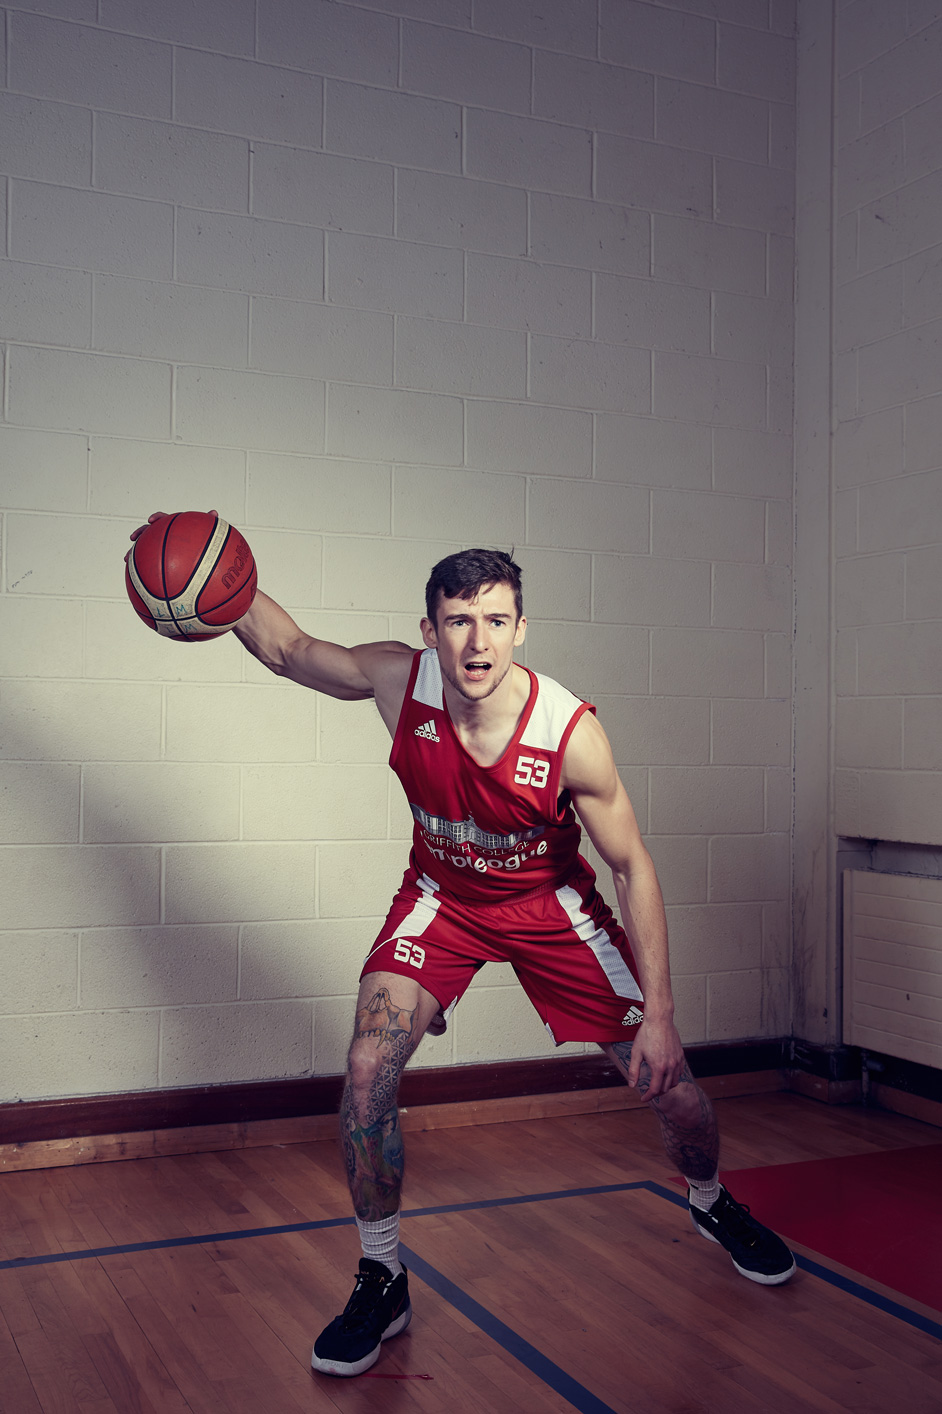 athlete portraits: the beautiful game of basketball